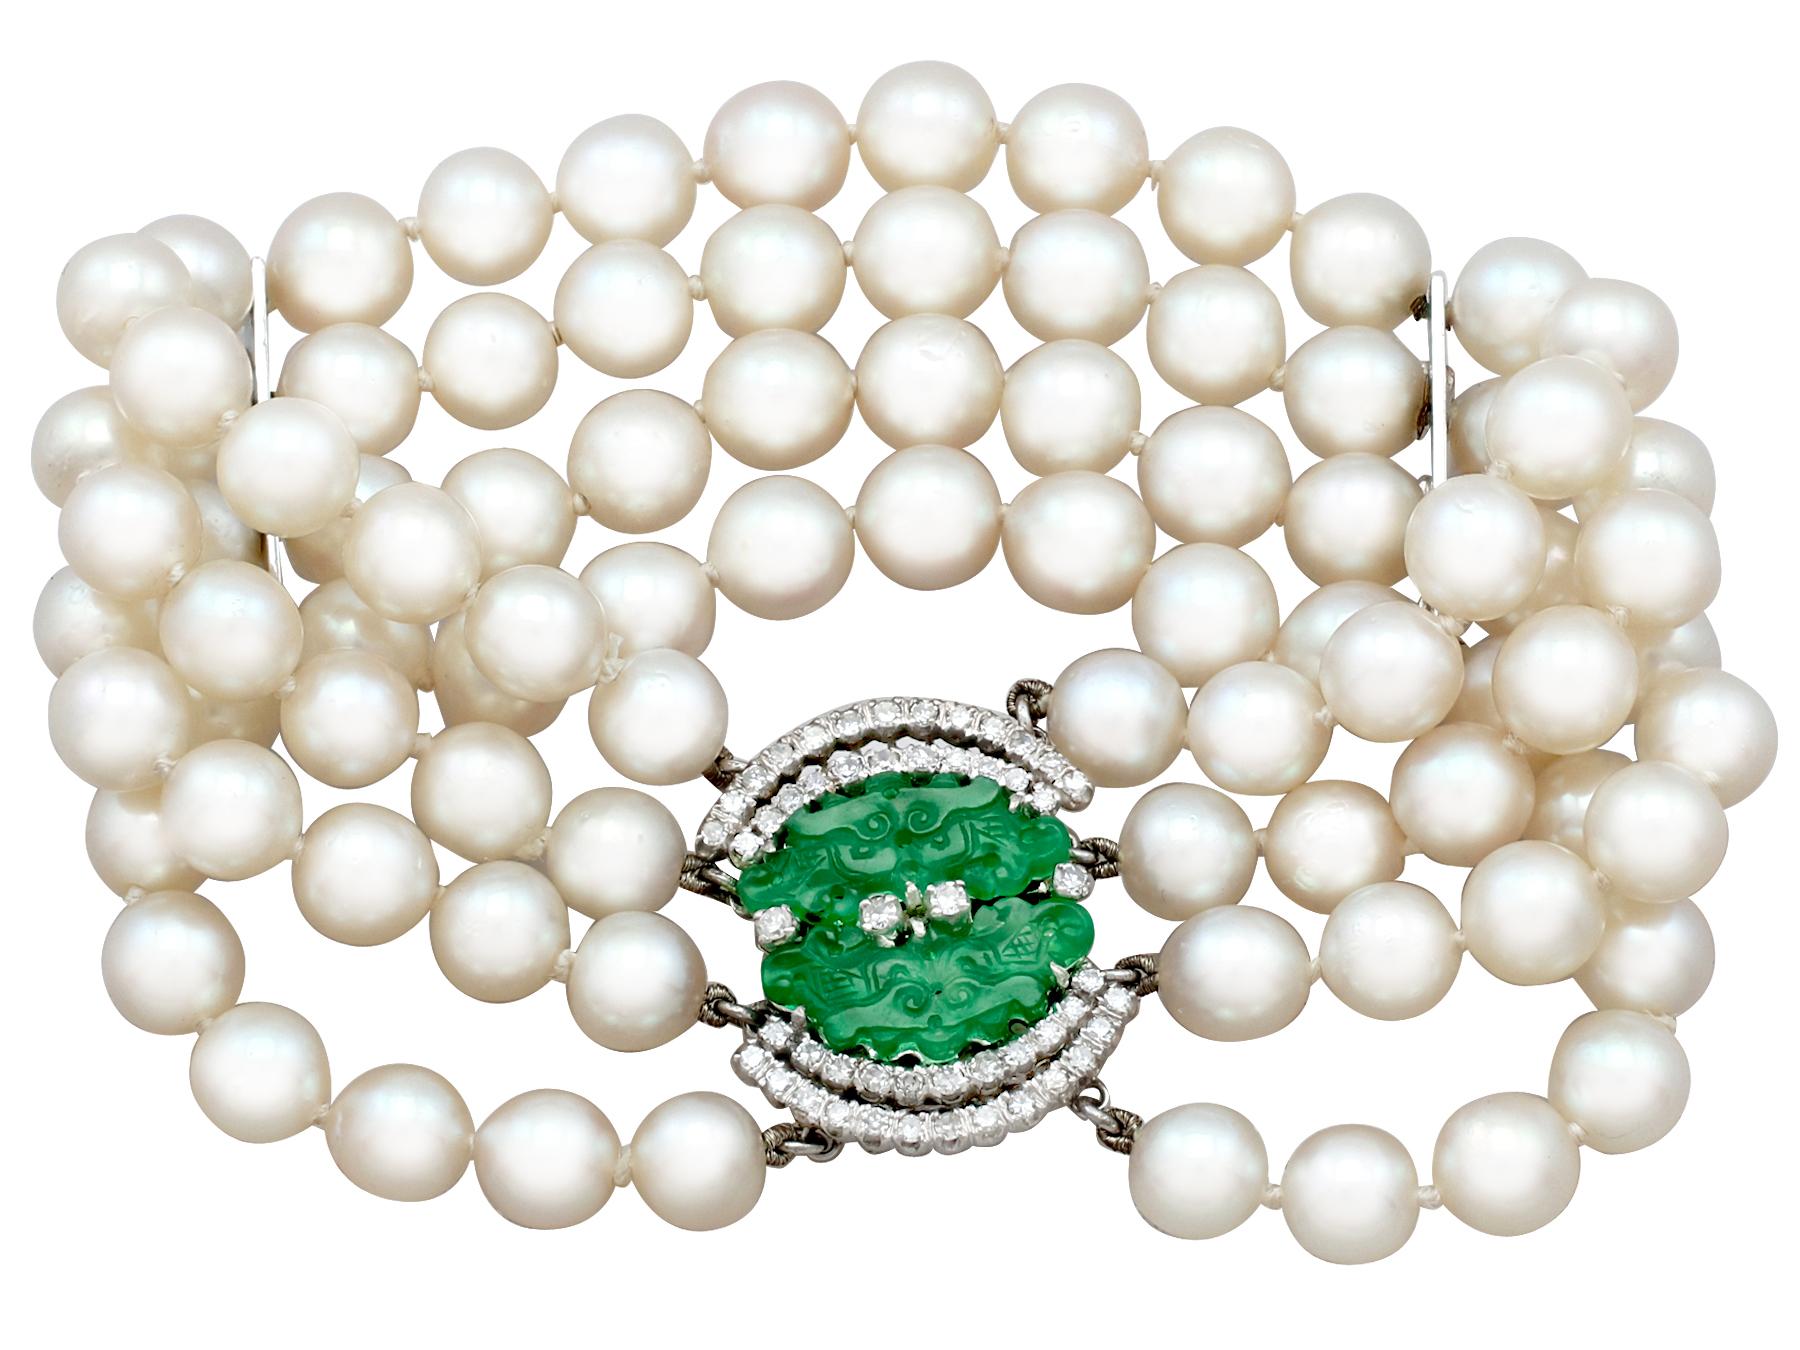 A stunning vintage 1.38 carat diamond and jadeite, cultured pearl and 18 karat white gold bracelet; part of our diverse pearl jewelry collections.

This fine and impressive vintage multi-strand pearl bracelet has been crafted in 18k white gold.

The